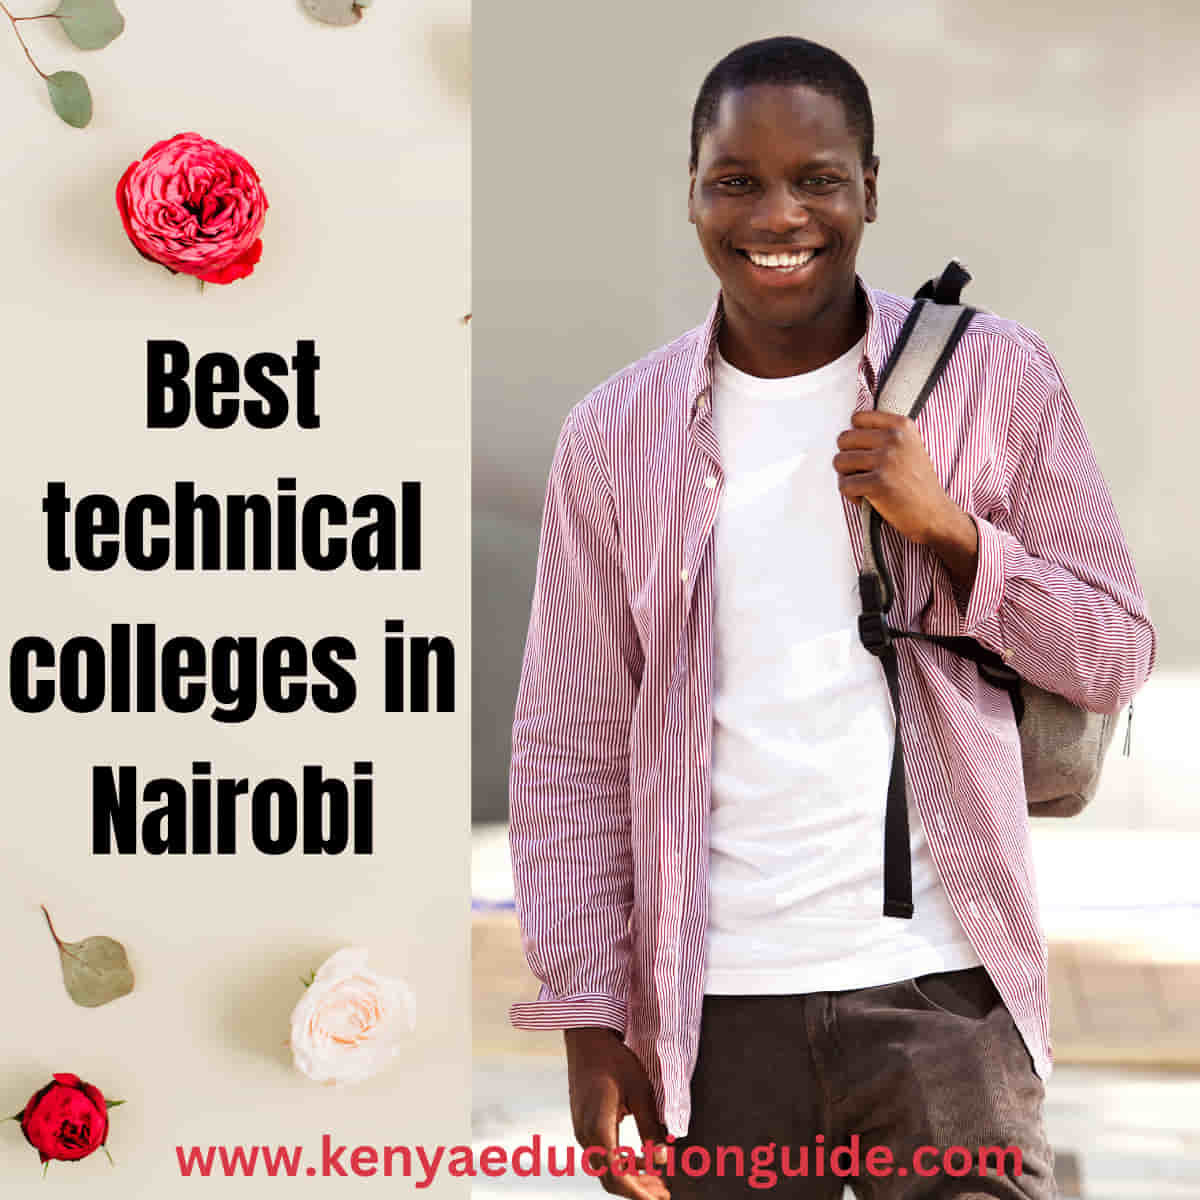 Best technical colleges in Nairobi